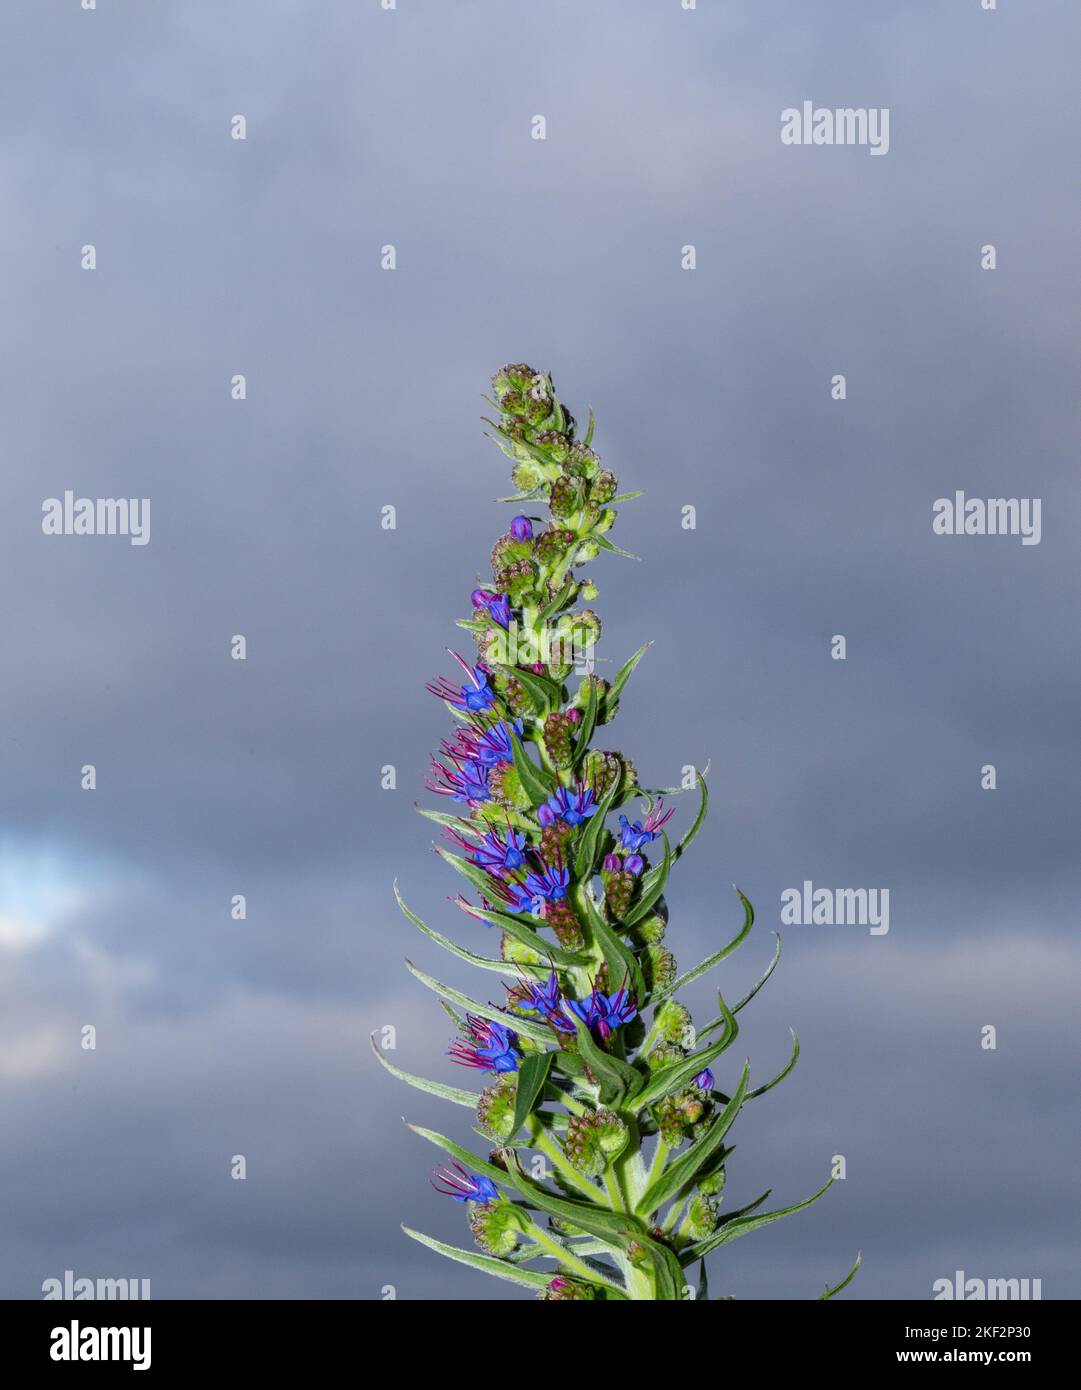 Echium candicans, the pride of Madeira, is a species of flowering plant in the family Boraginaceae, native to the island of Madeira. Stock Photo